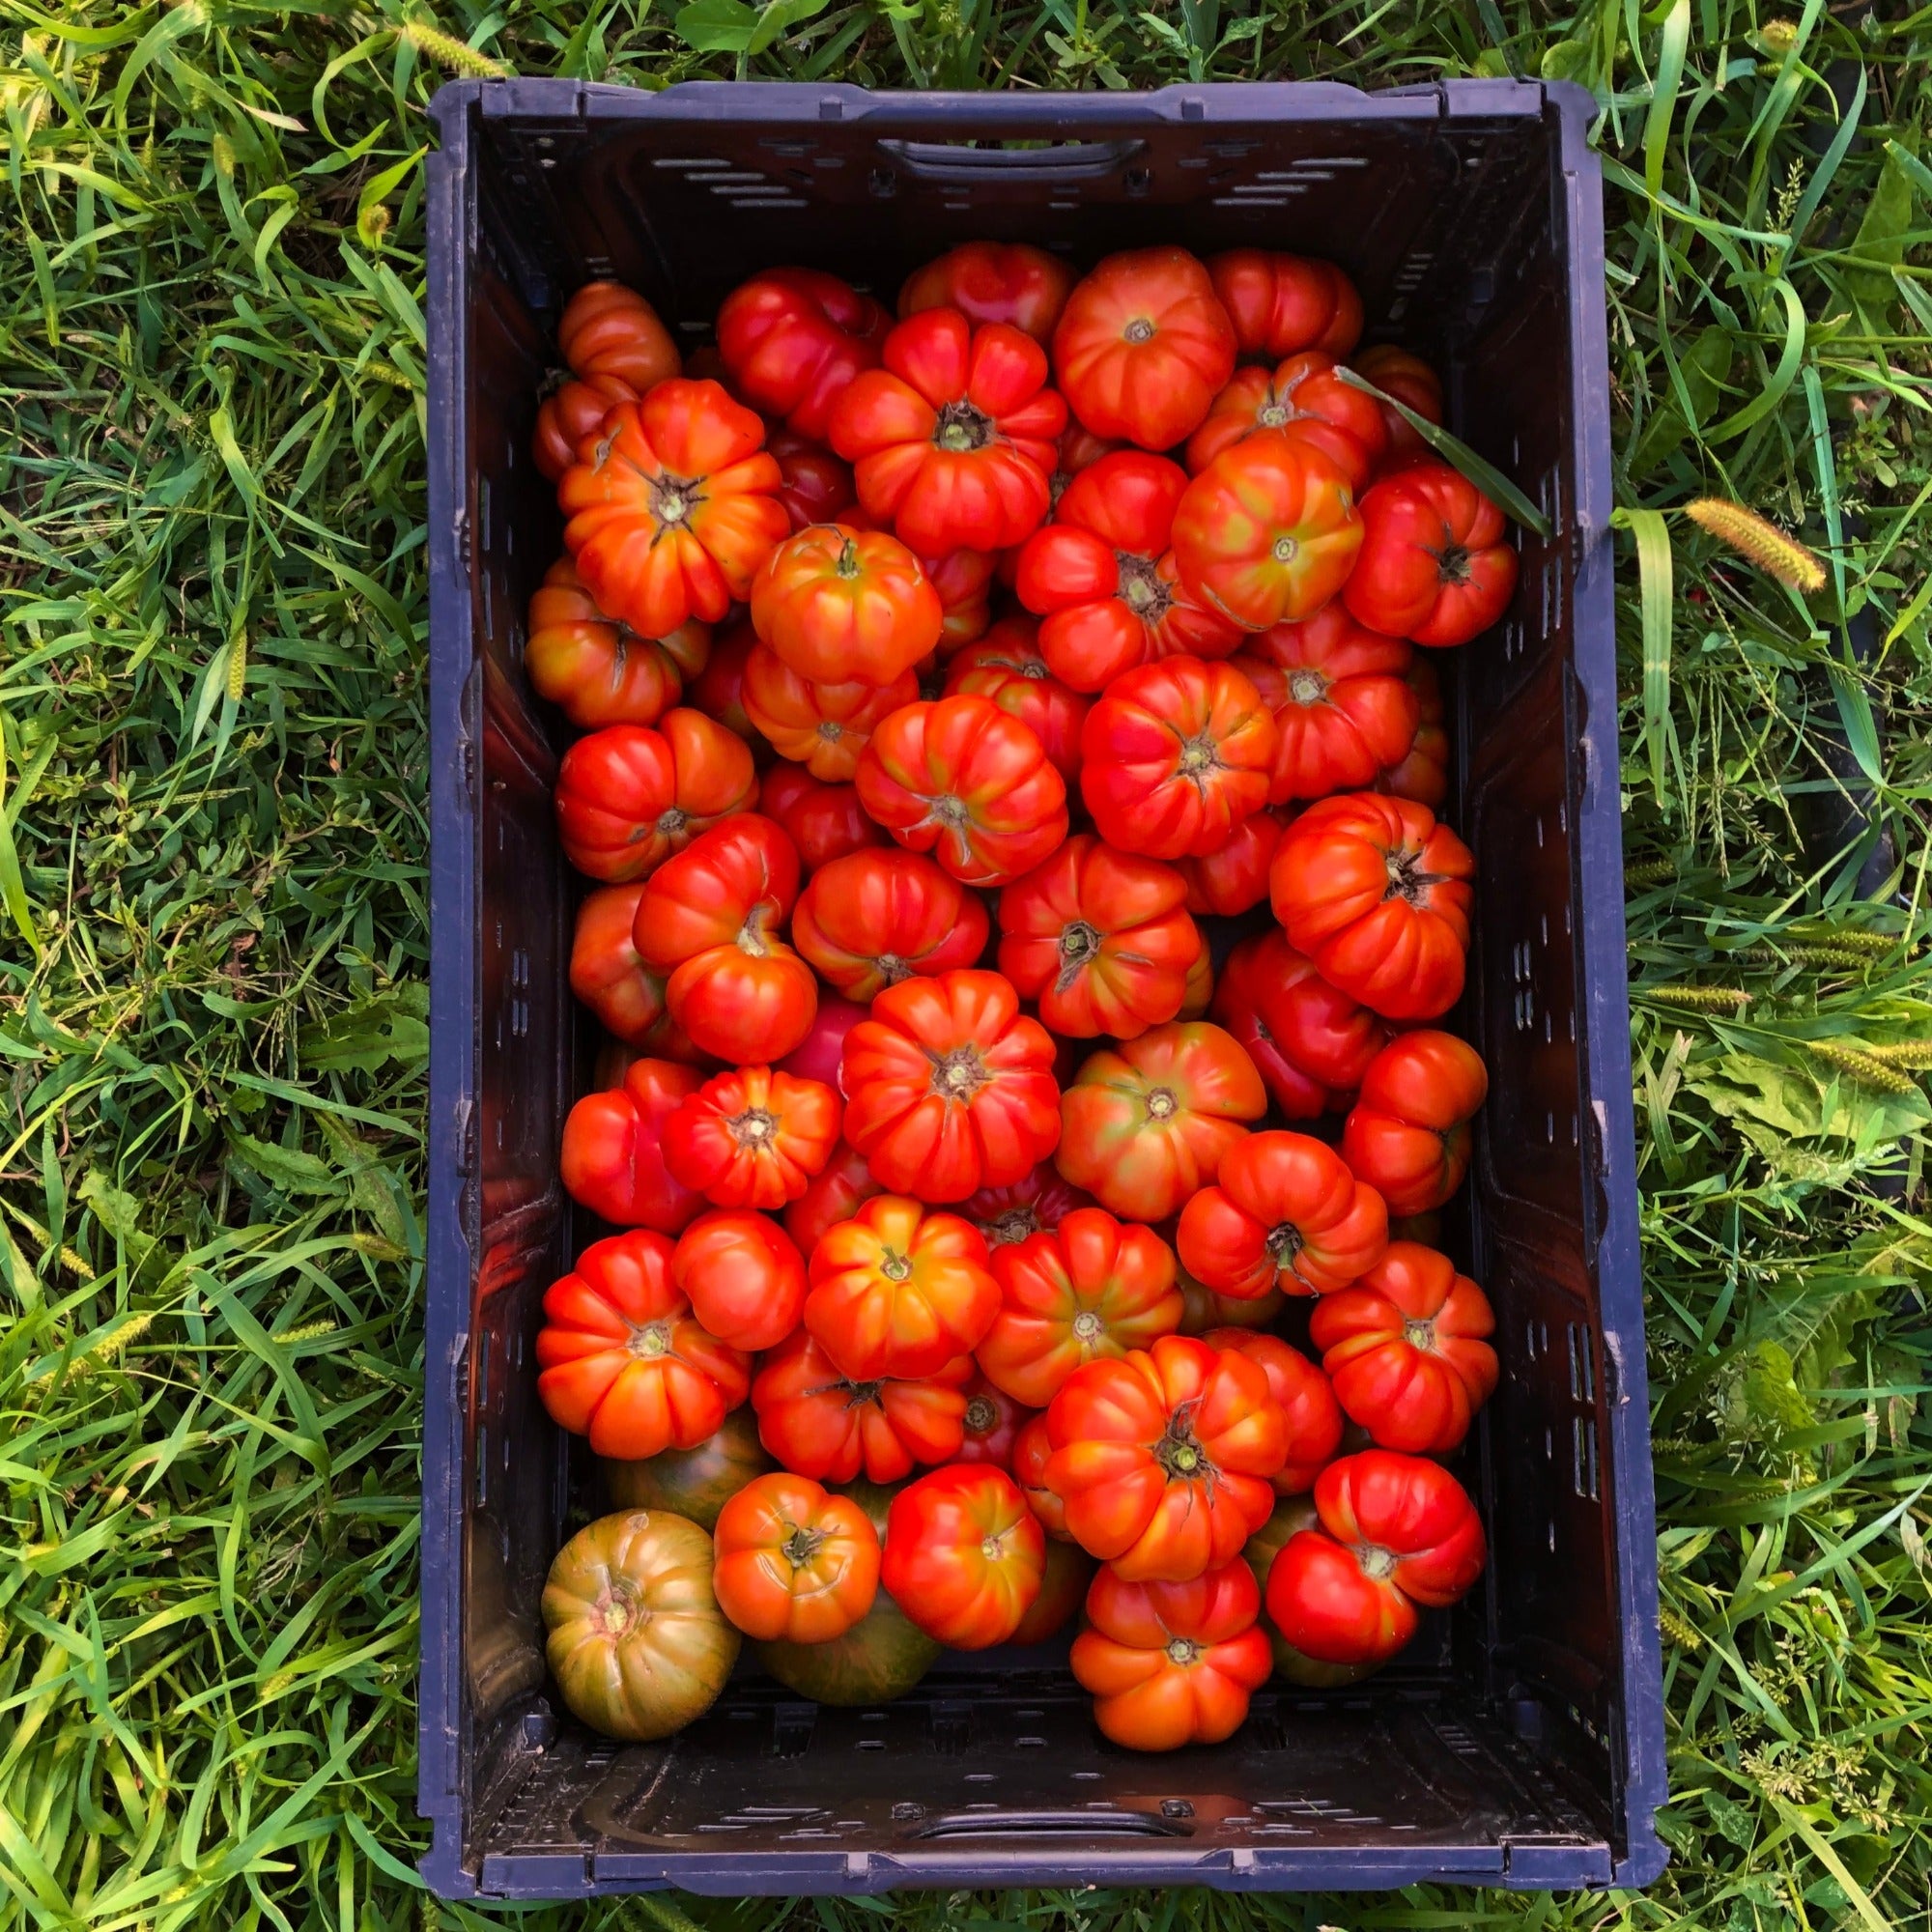 A crate of pisanello tomatoes